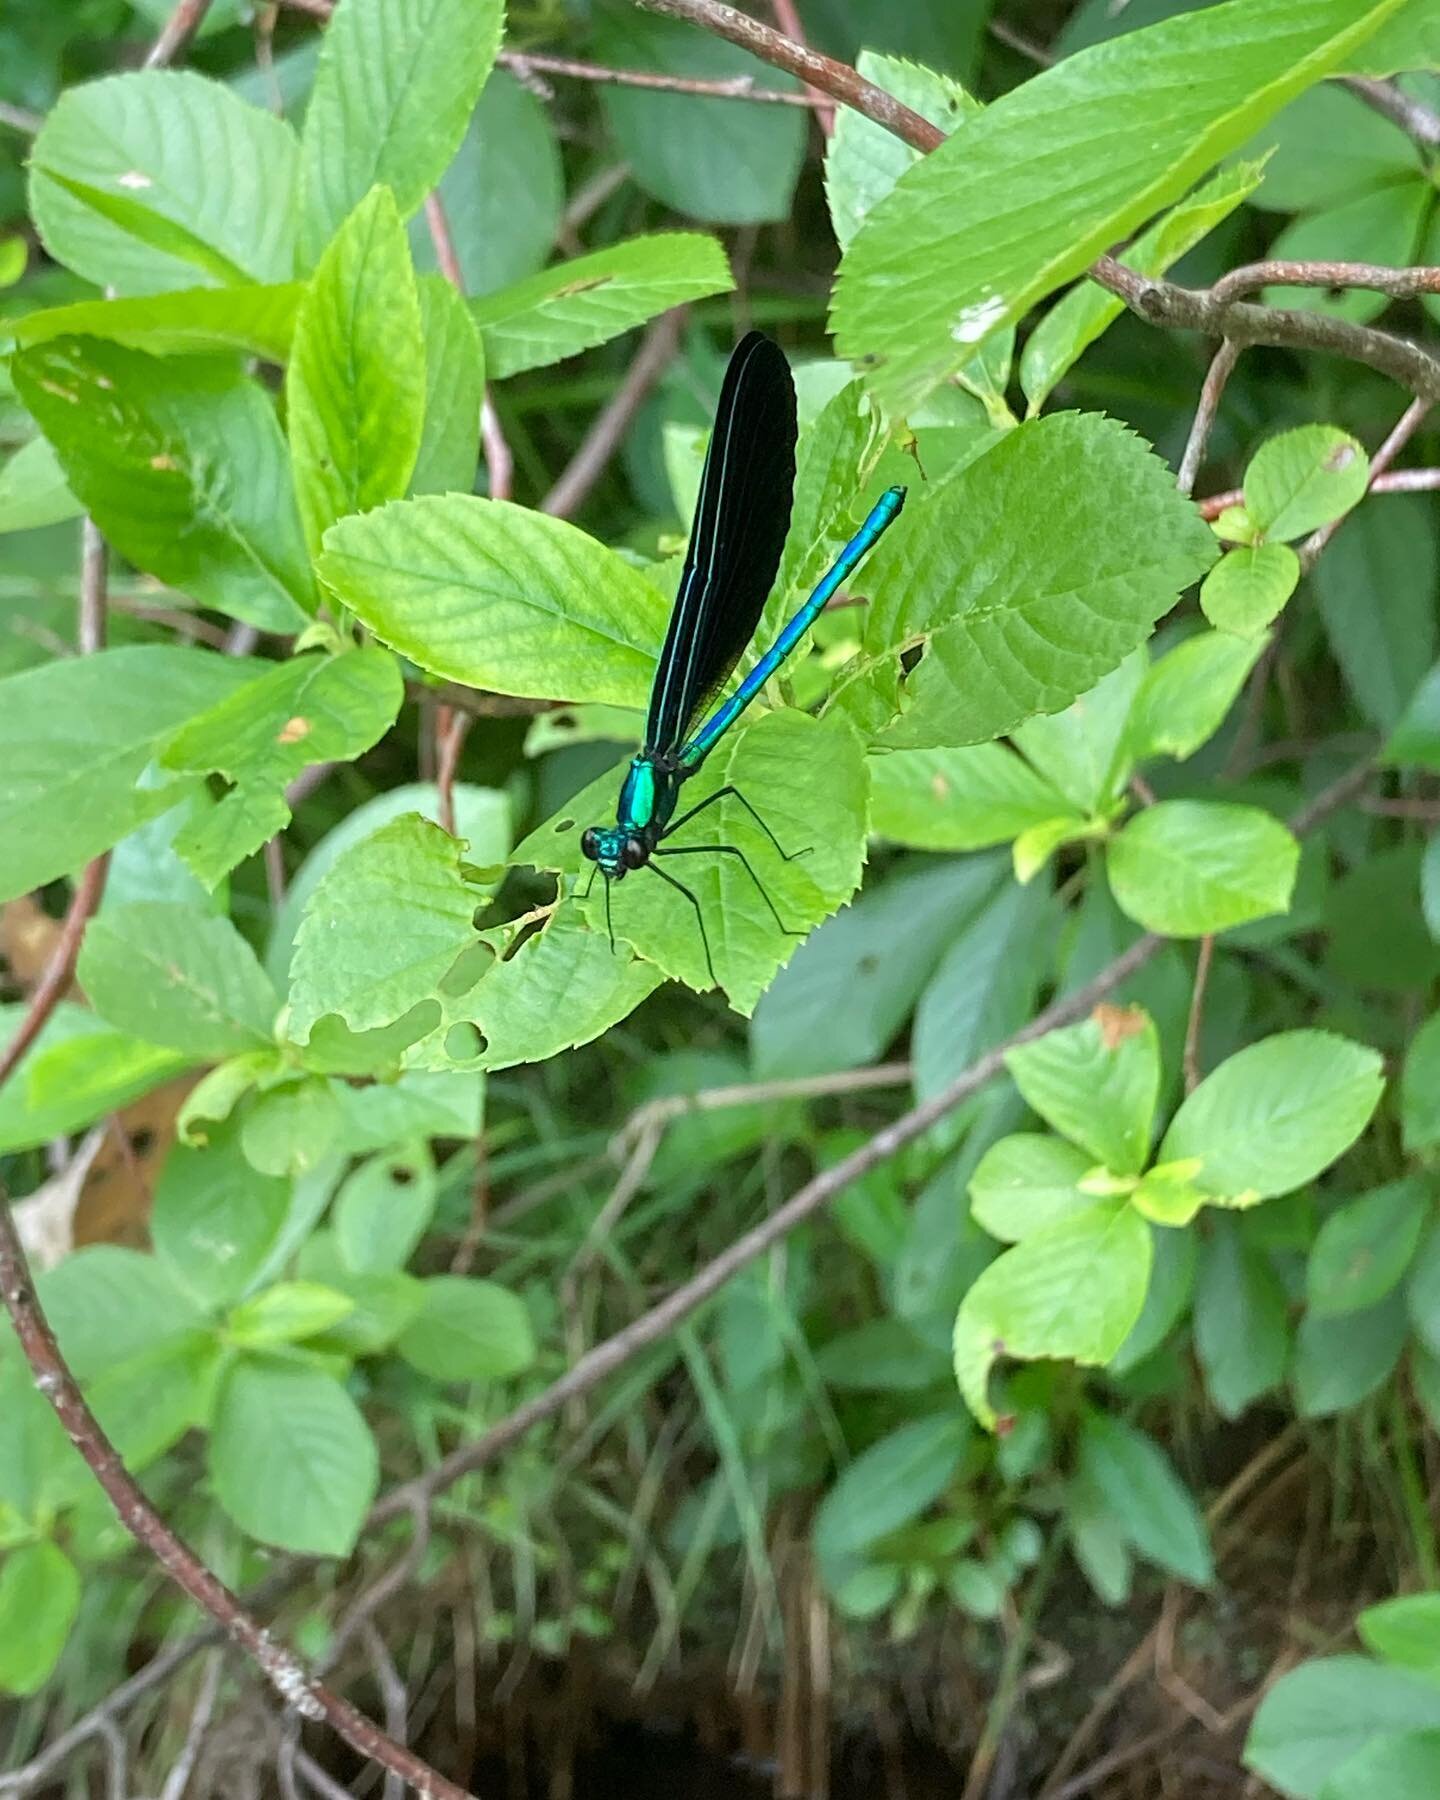 Eco forestry example: as part of keeping the stream environment healthy for creatures like this ebony jewelwing, we planted stinging nettle downslope from a horse paddock abutting our forest. The paddock sheds high levels of nitrogen in storms, and s